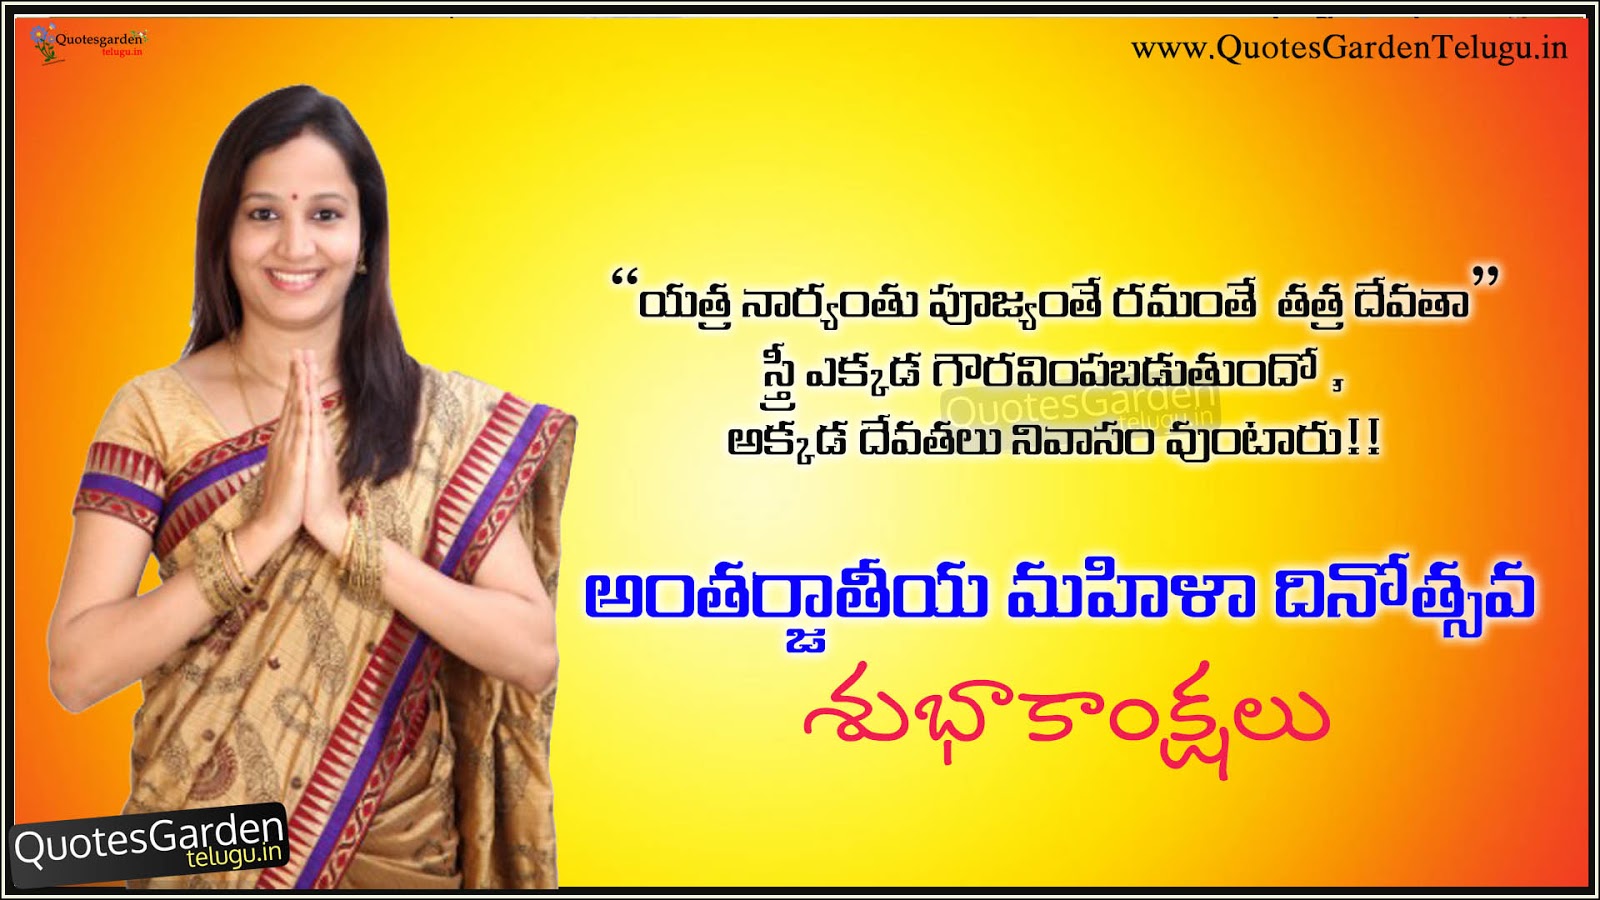 Happy Womens Day 2016 Greetings Quotes In Telugu Quotes Garden